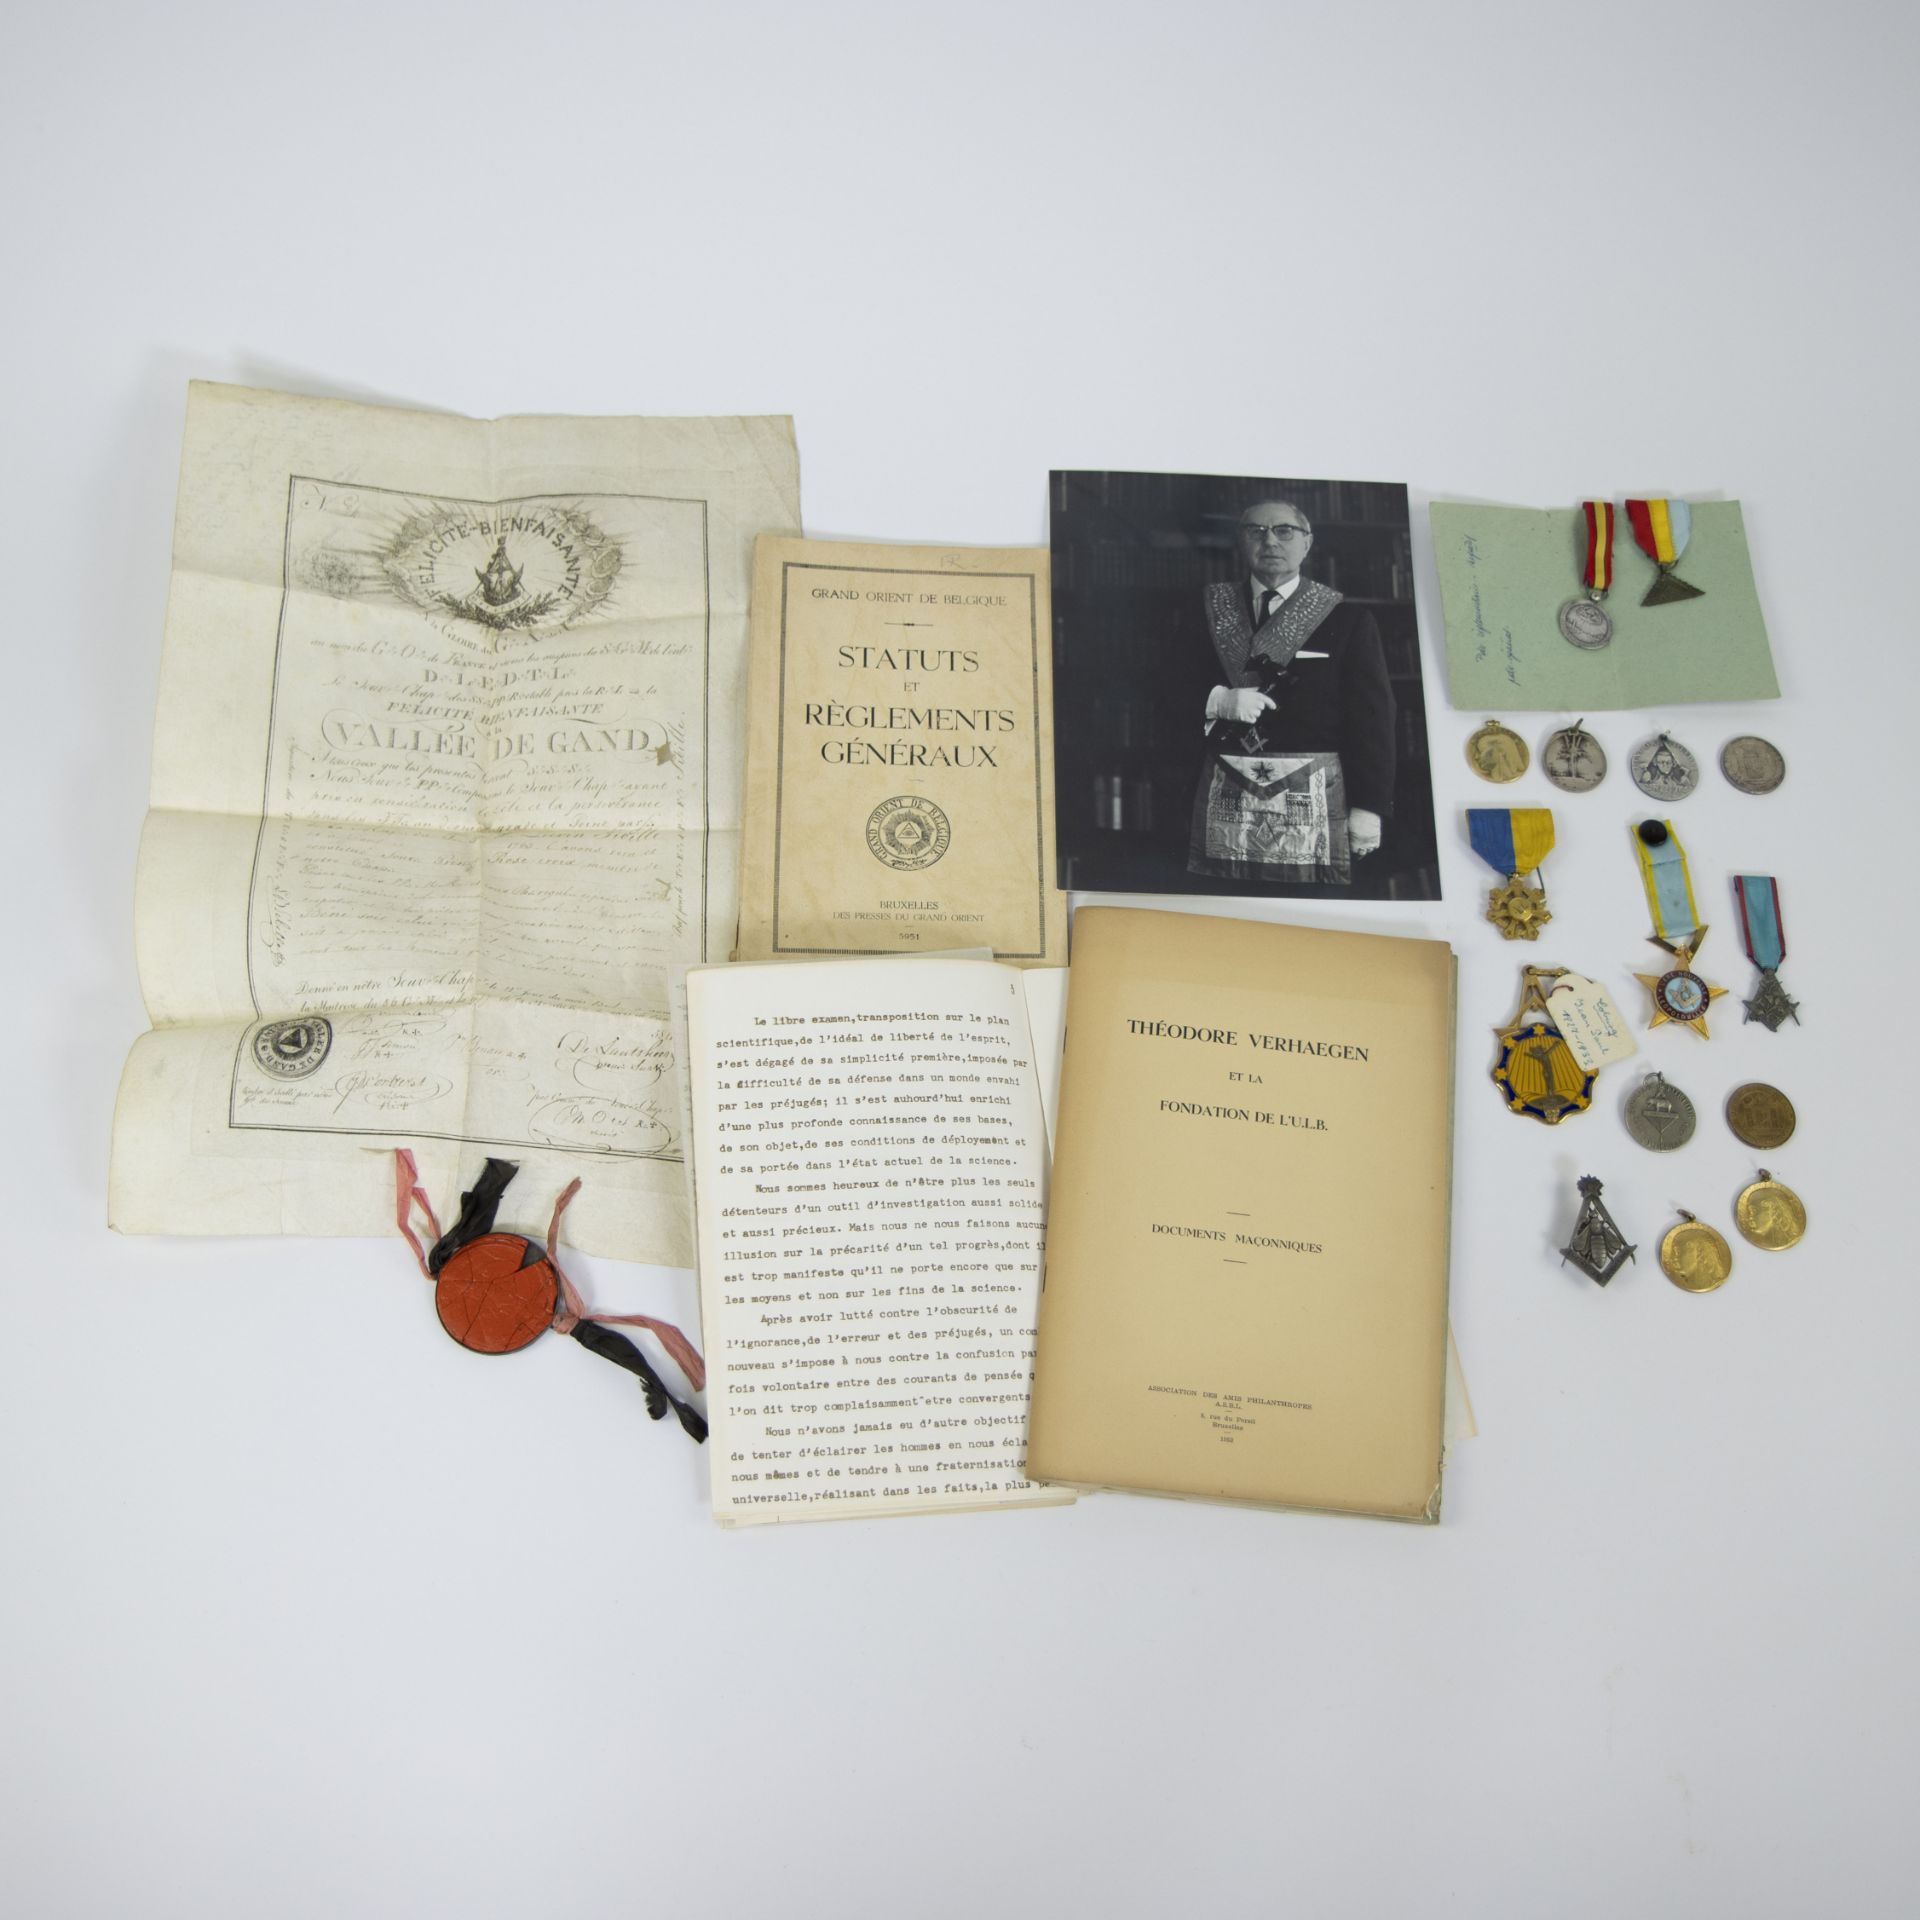 Collection of Lodge items, tokens, documents and 18th century document with seal